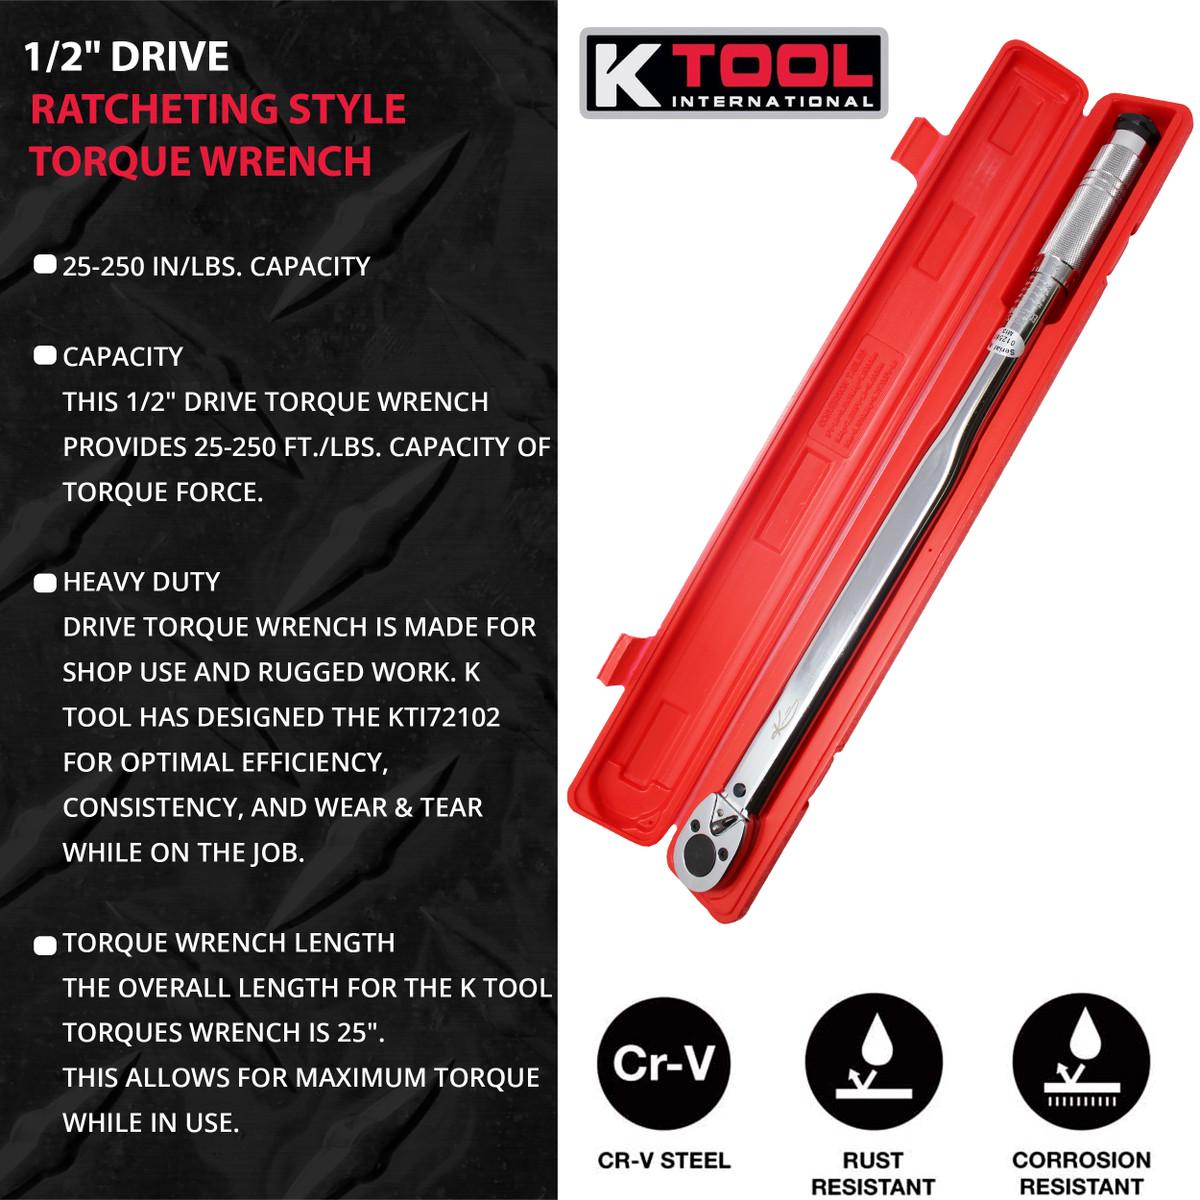 WRENCH TORQUE 1/2 DRIVE 25-250FT./LBS.